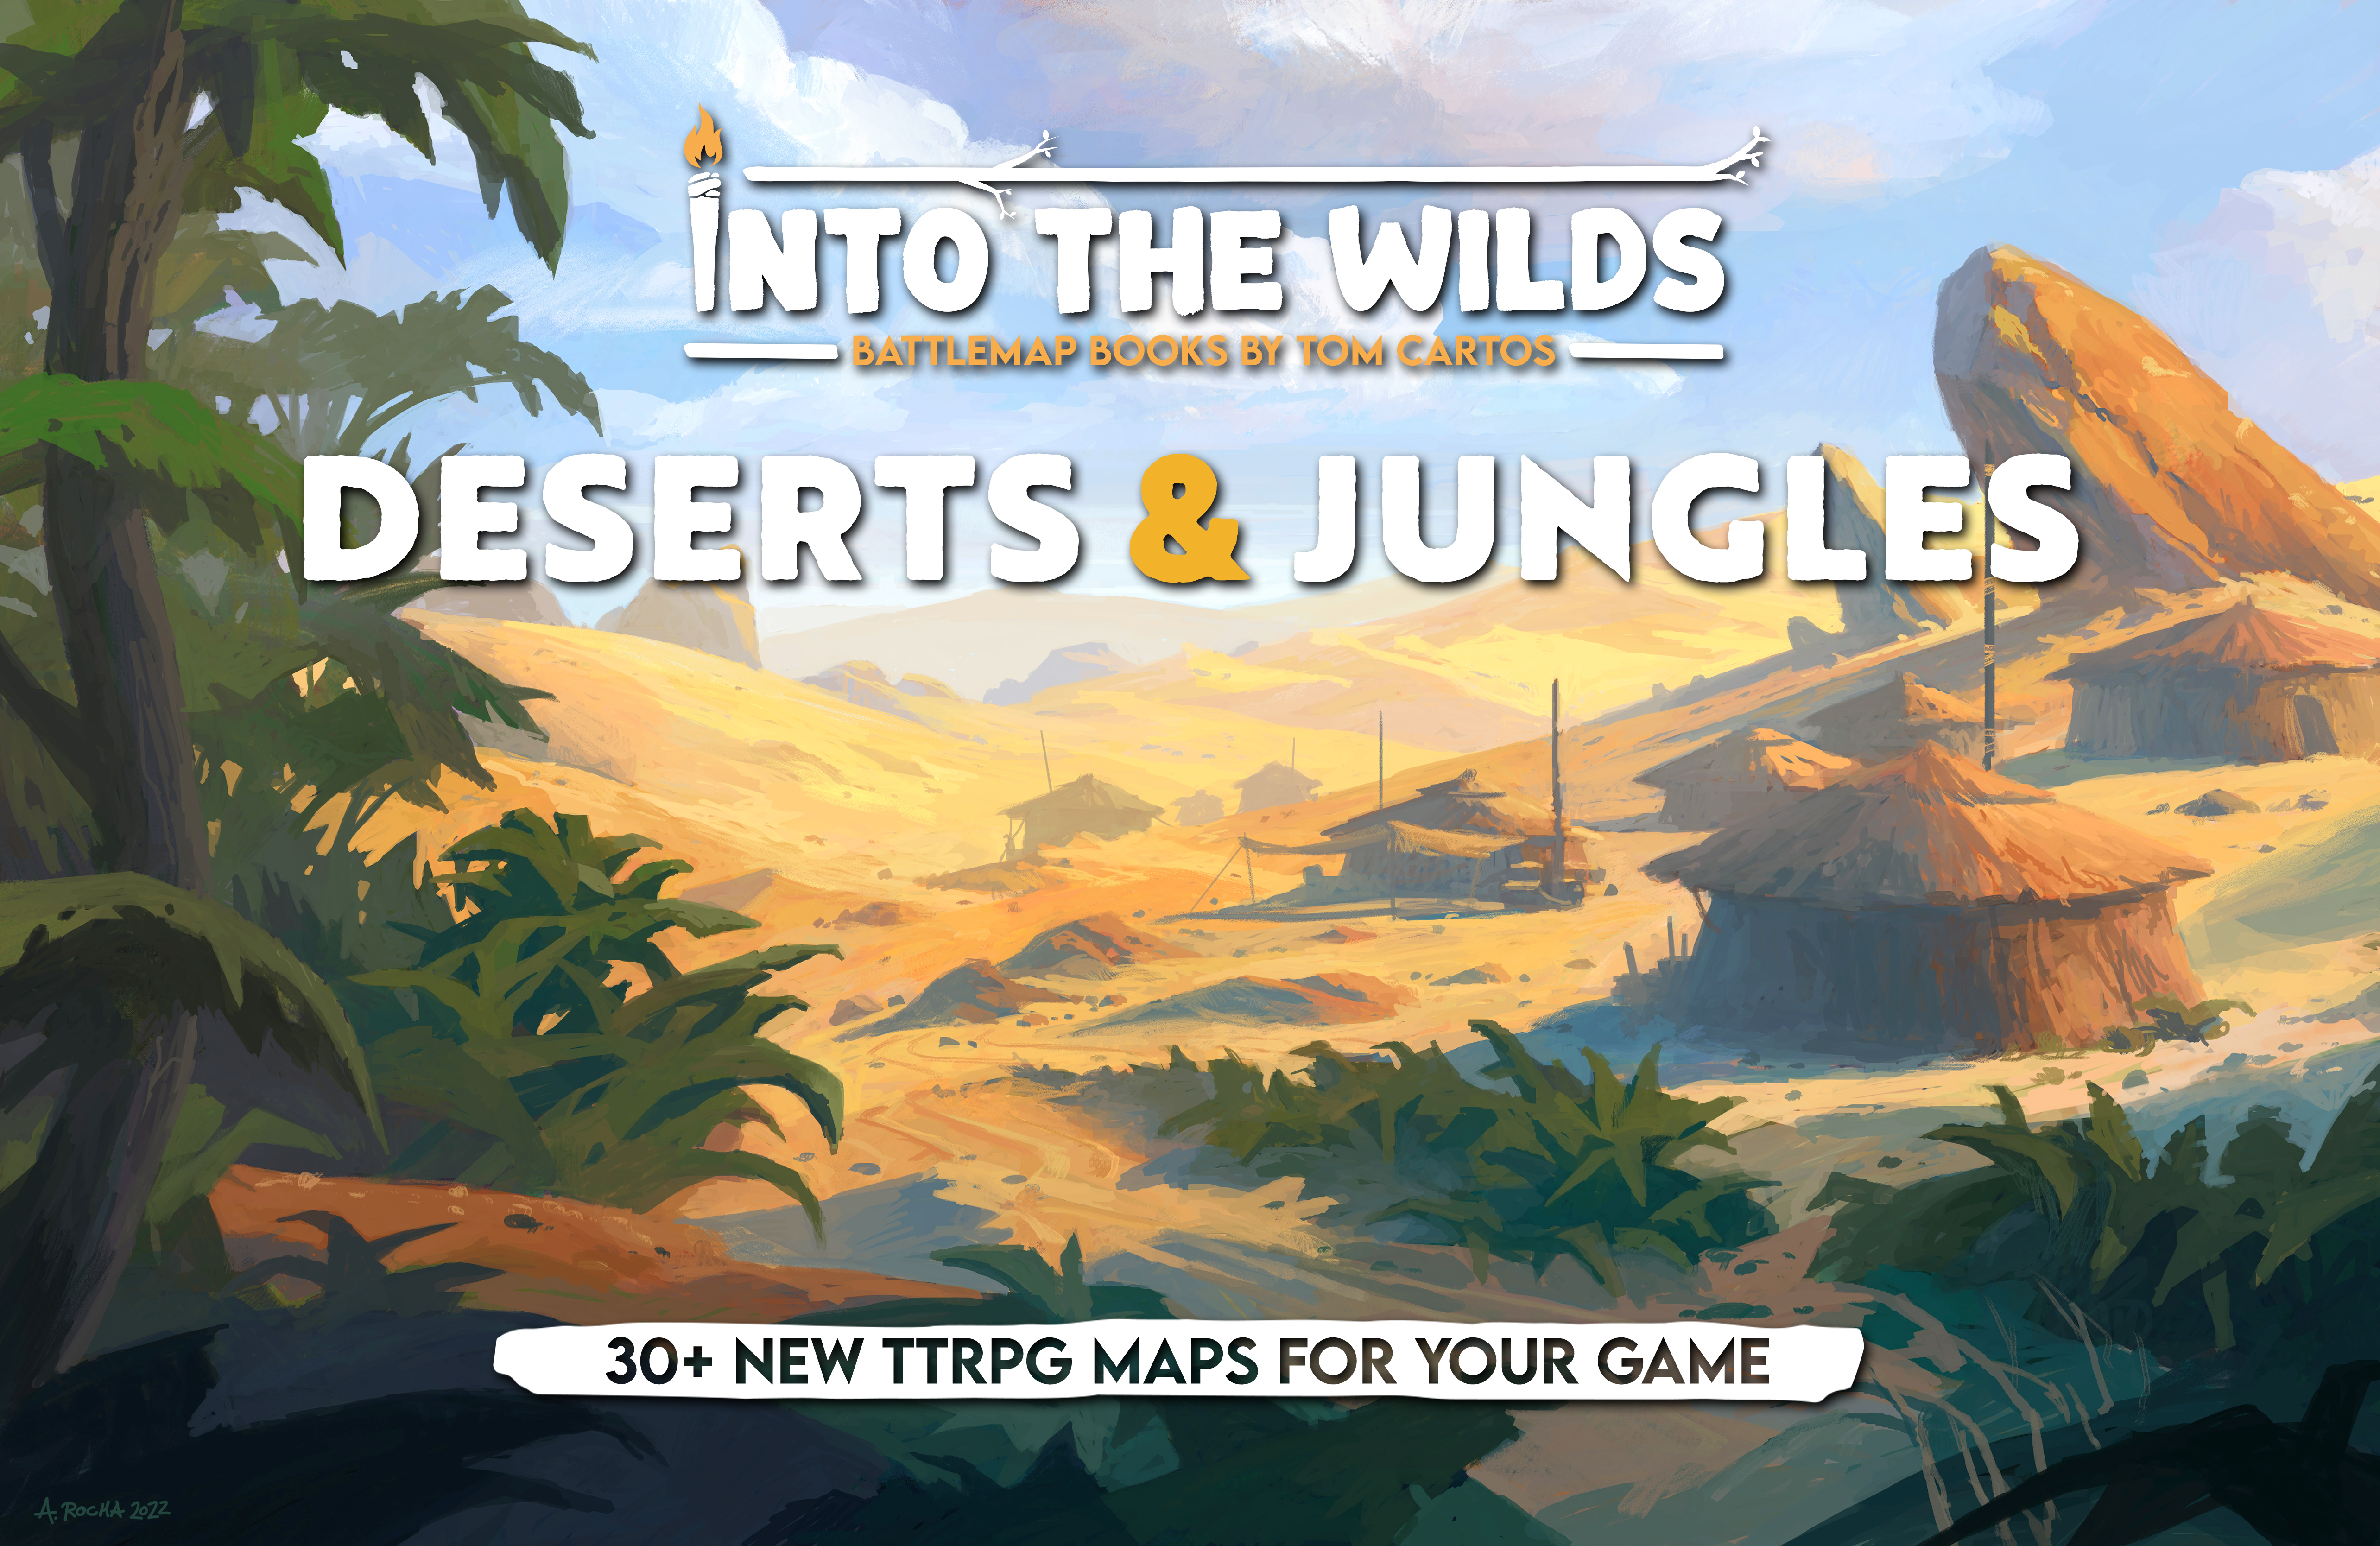 Into the Wilds Battlemap Books: Deserts and Jungles 